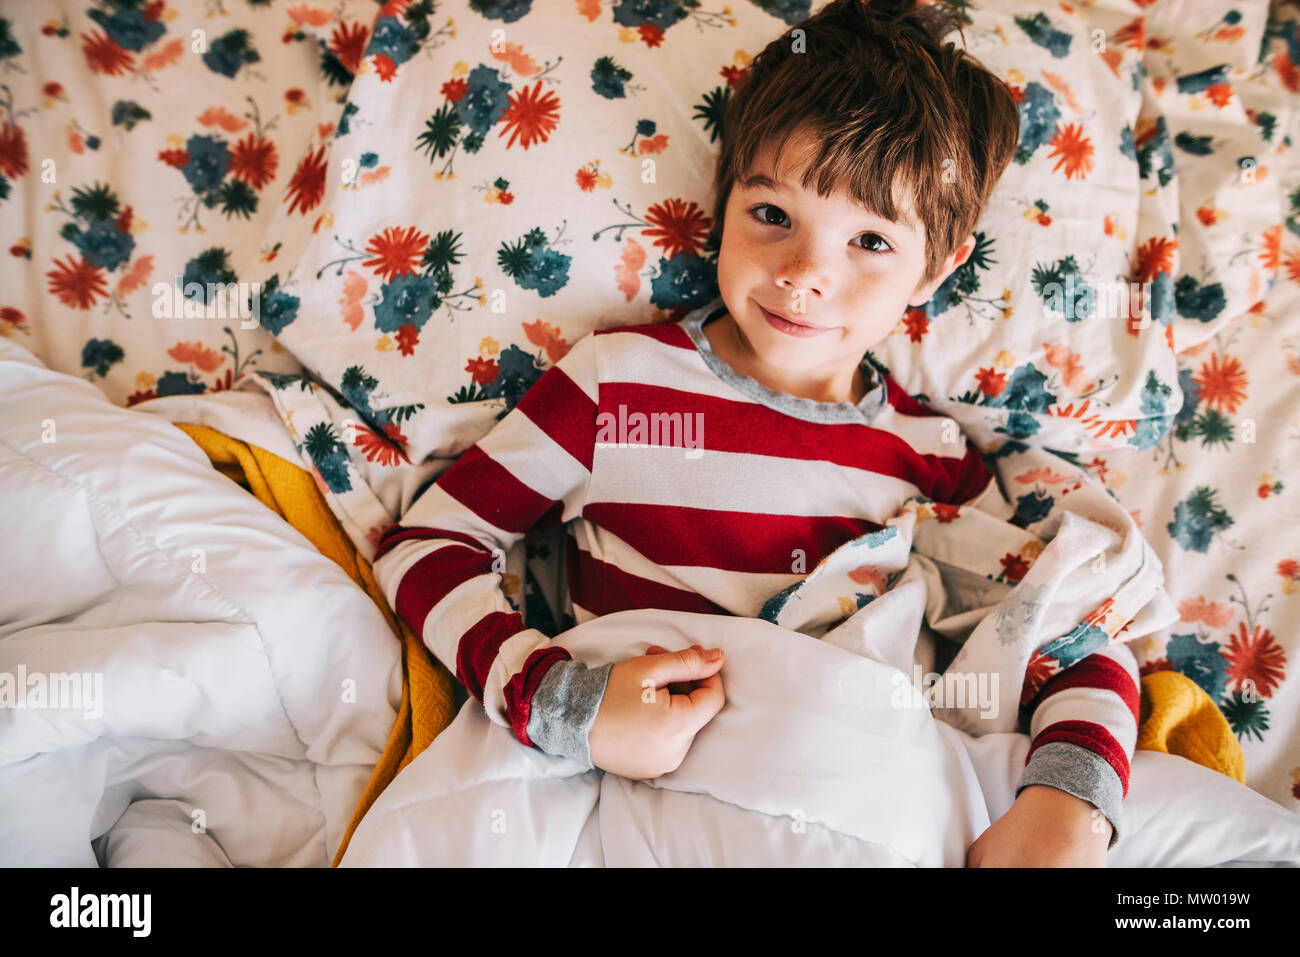 Smiling boy lying in bed Stock Photo